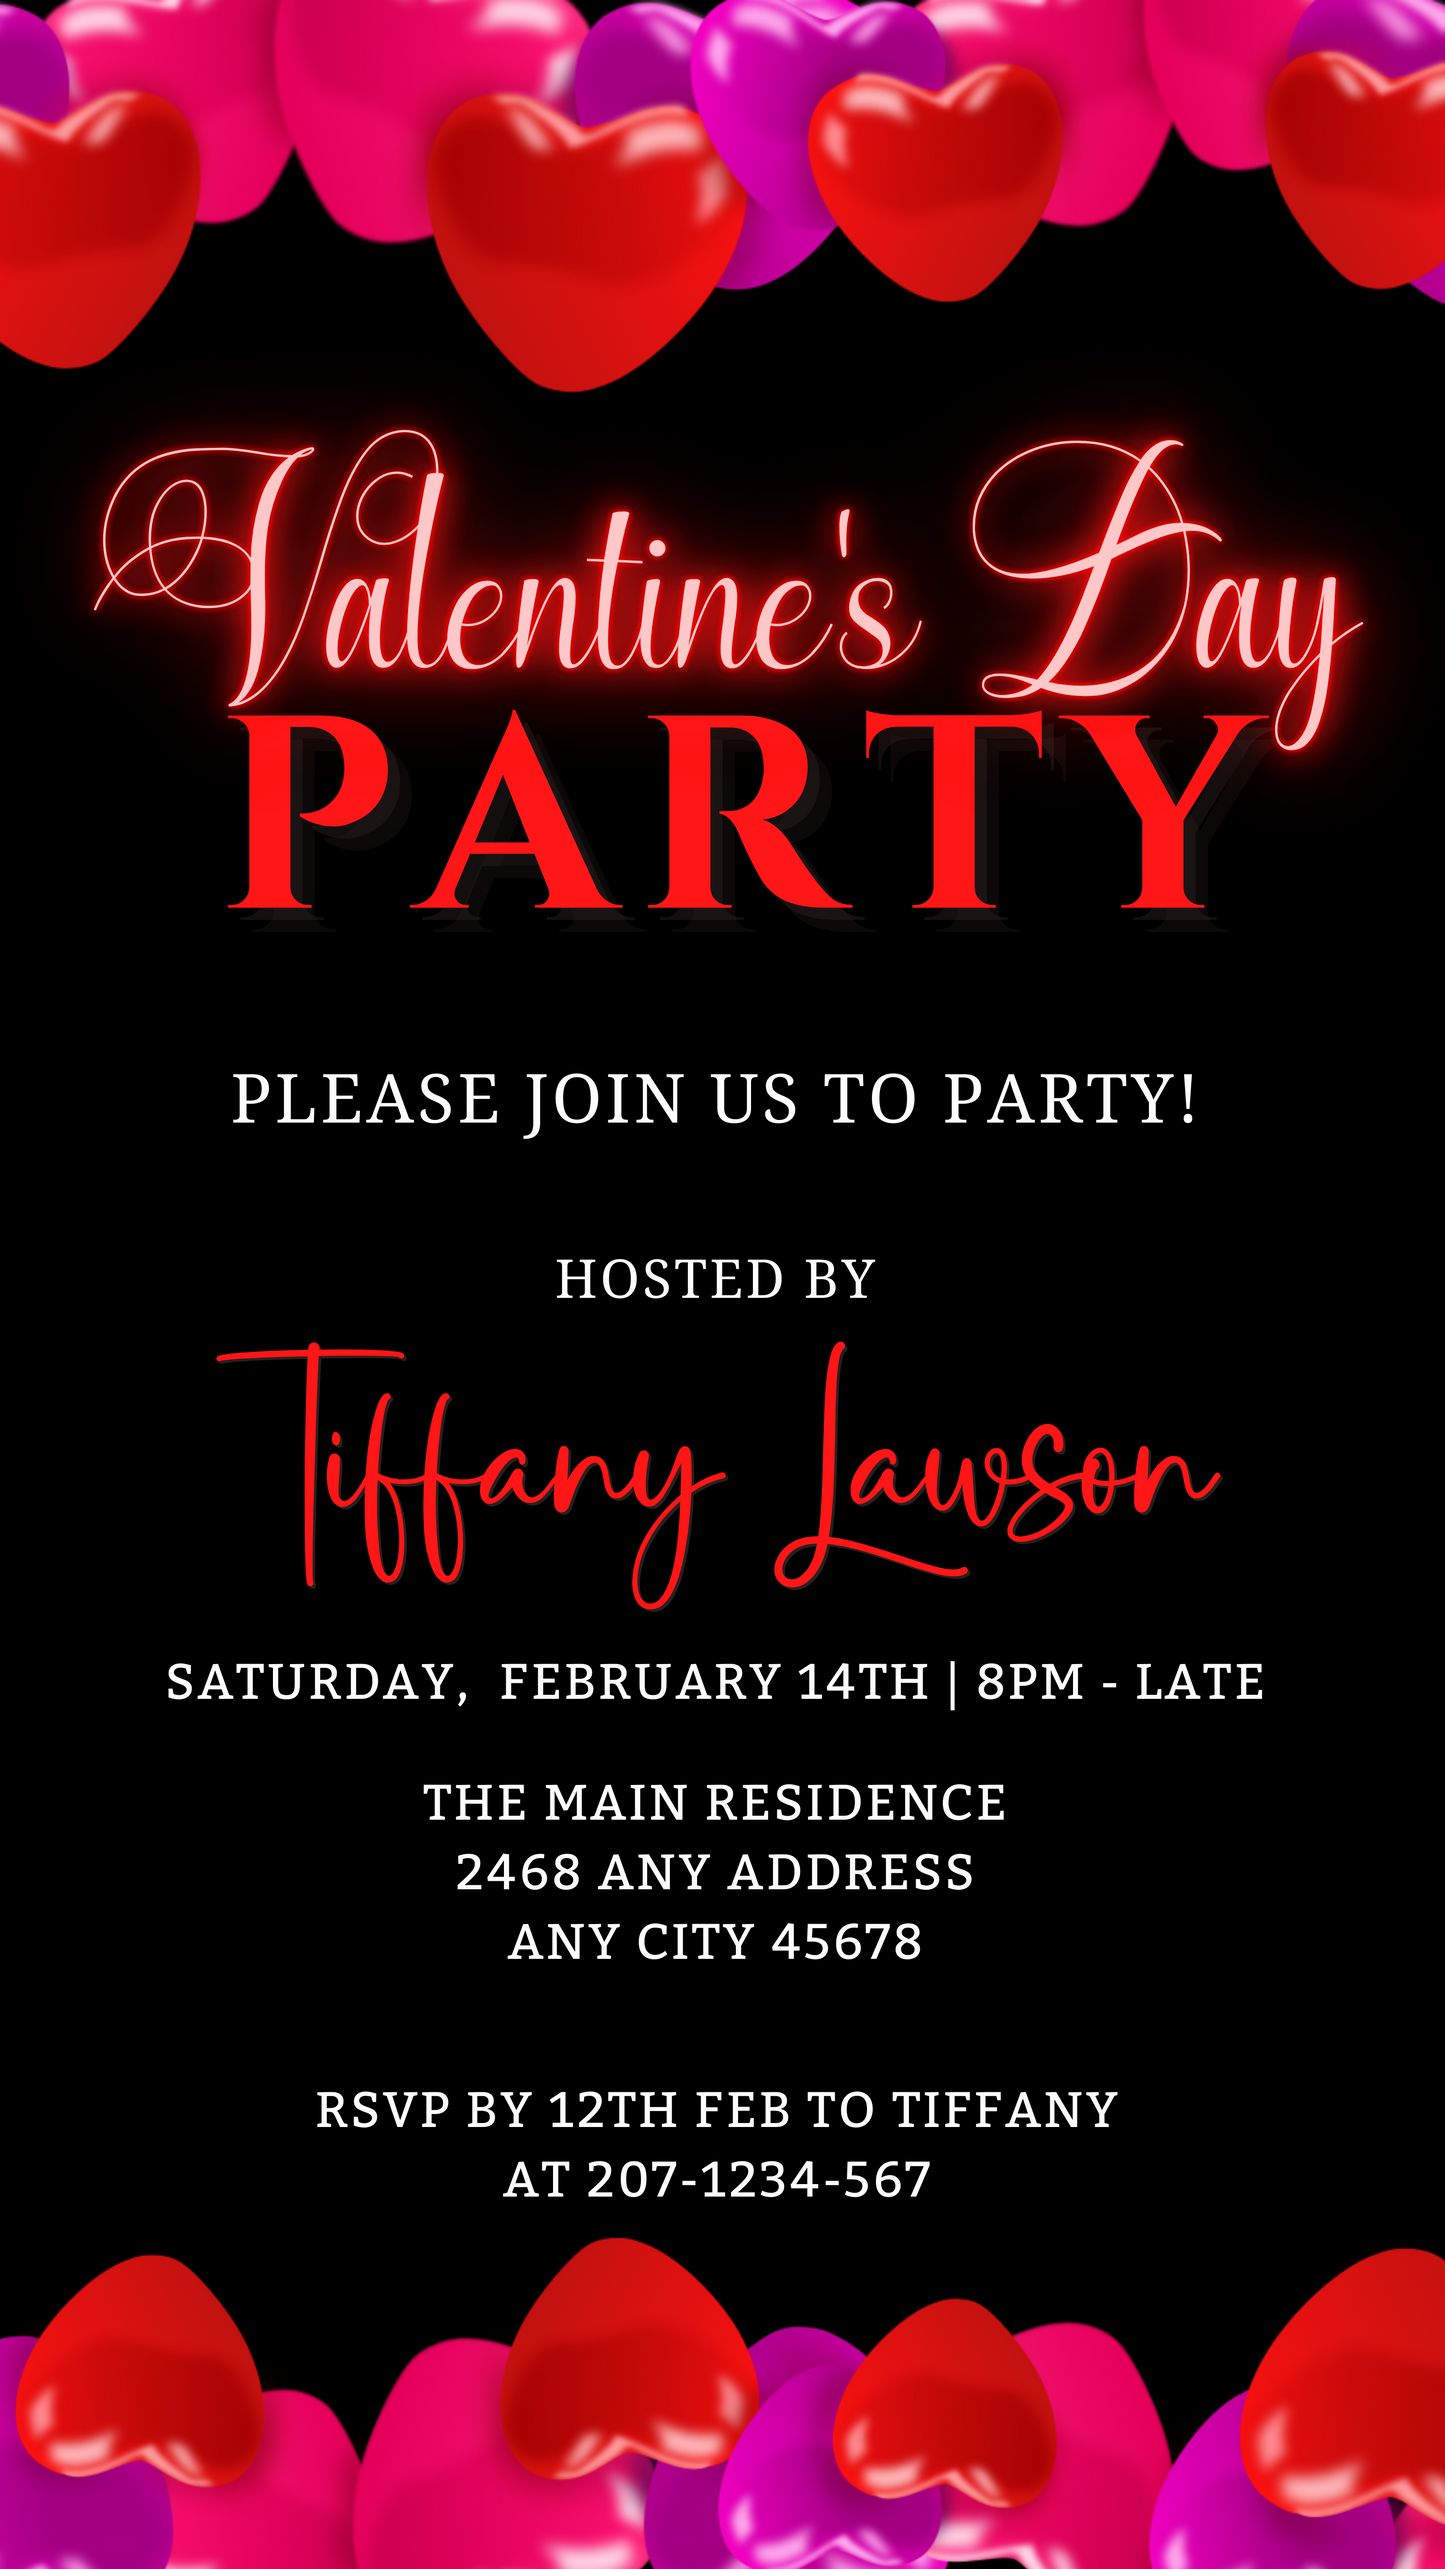 Black Pink Red Hearts Valentines Party Evite, featuring editable text and graphics for a customizable digital invitation template, viewable on smartphones.